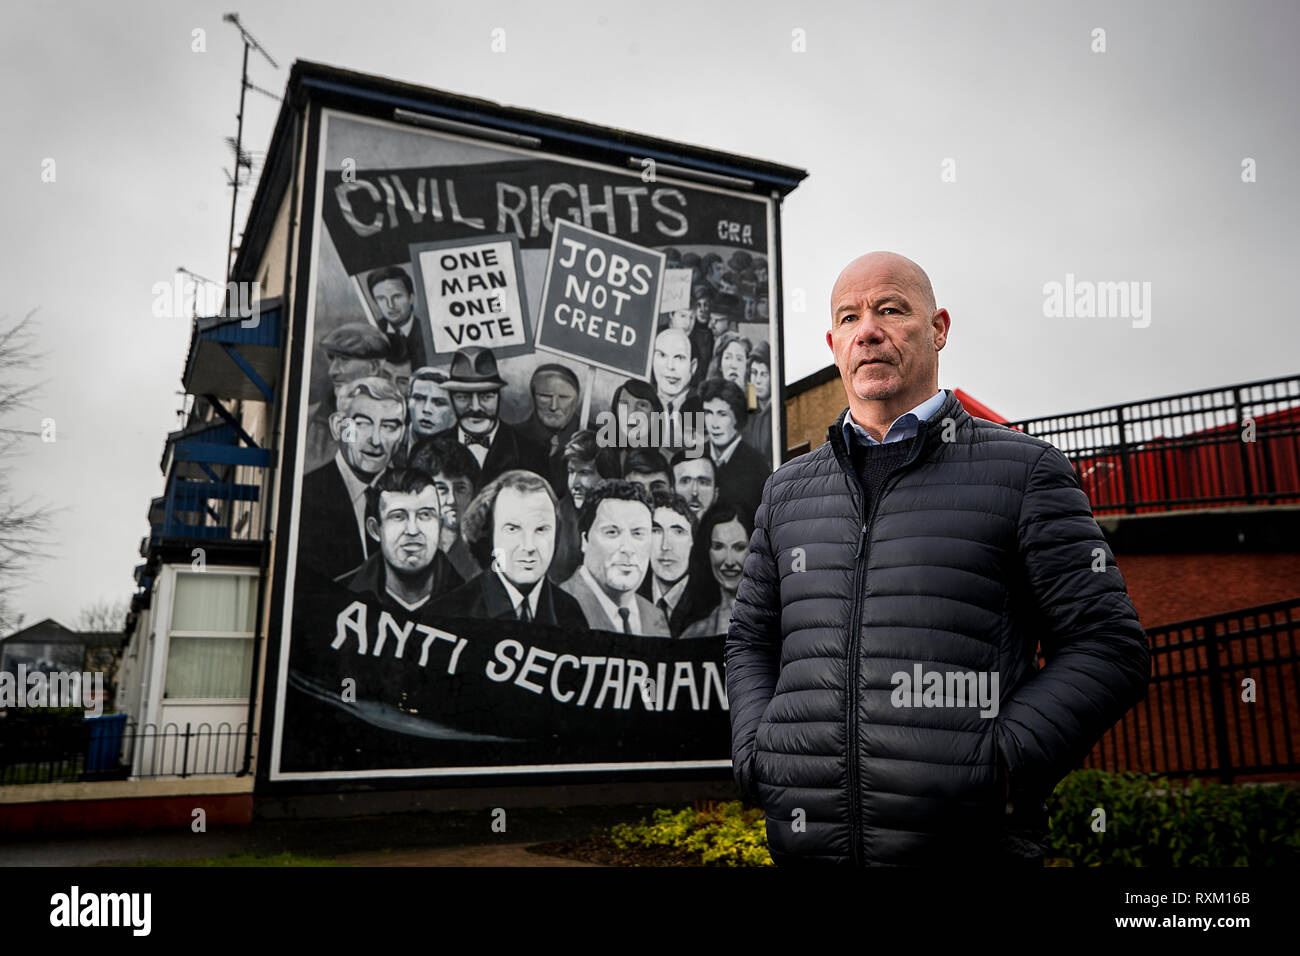 John McKinney whose brother William was killed on Bloody Sunday stands beside the Civil Rights mural in Derry City's Bogside. The Public Prosecution Service is expected to announce whether it will pursue prosecutions against soldiers over the deaths of 13 people in Londonderry on January 30 1972. Stock Photo